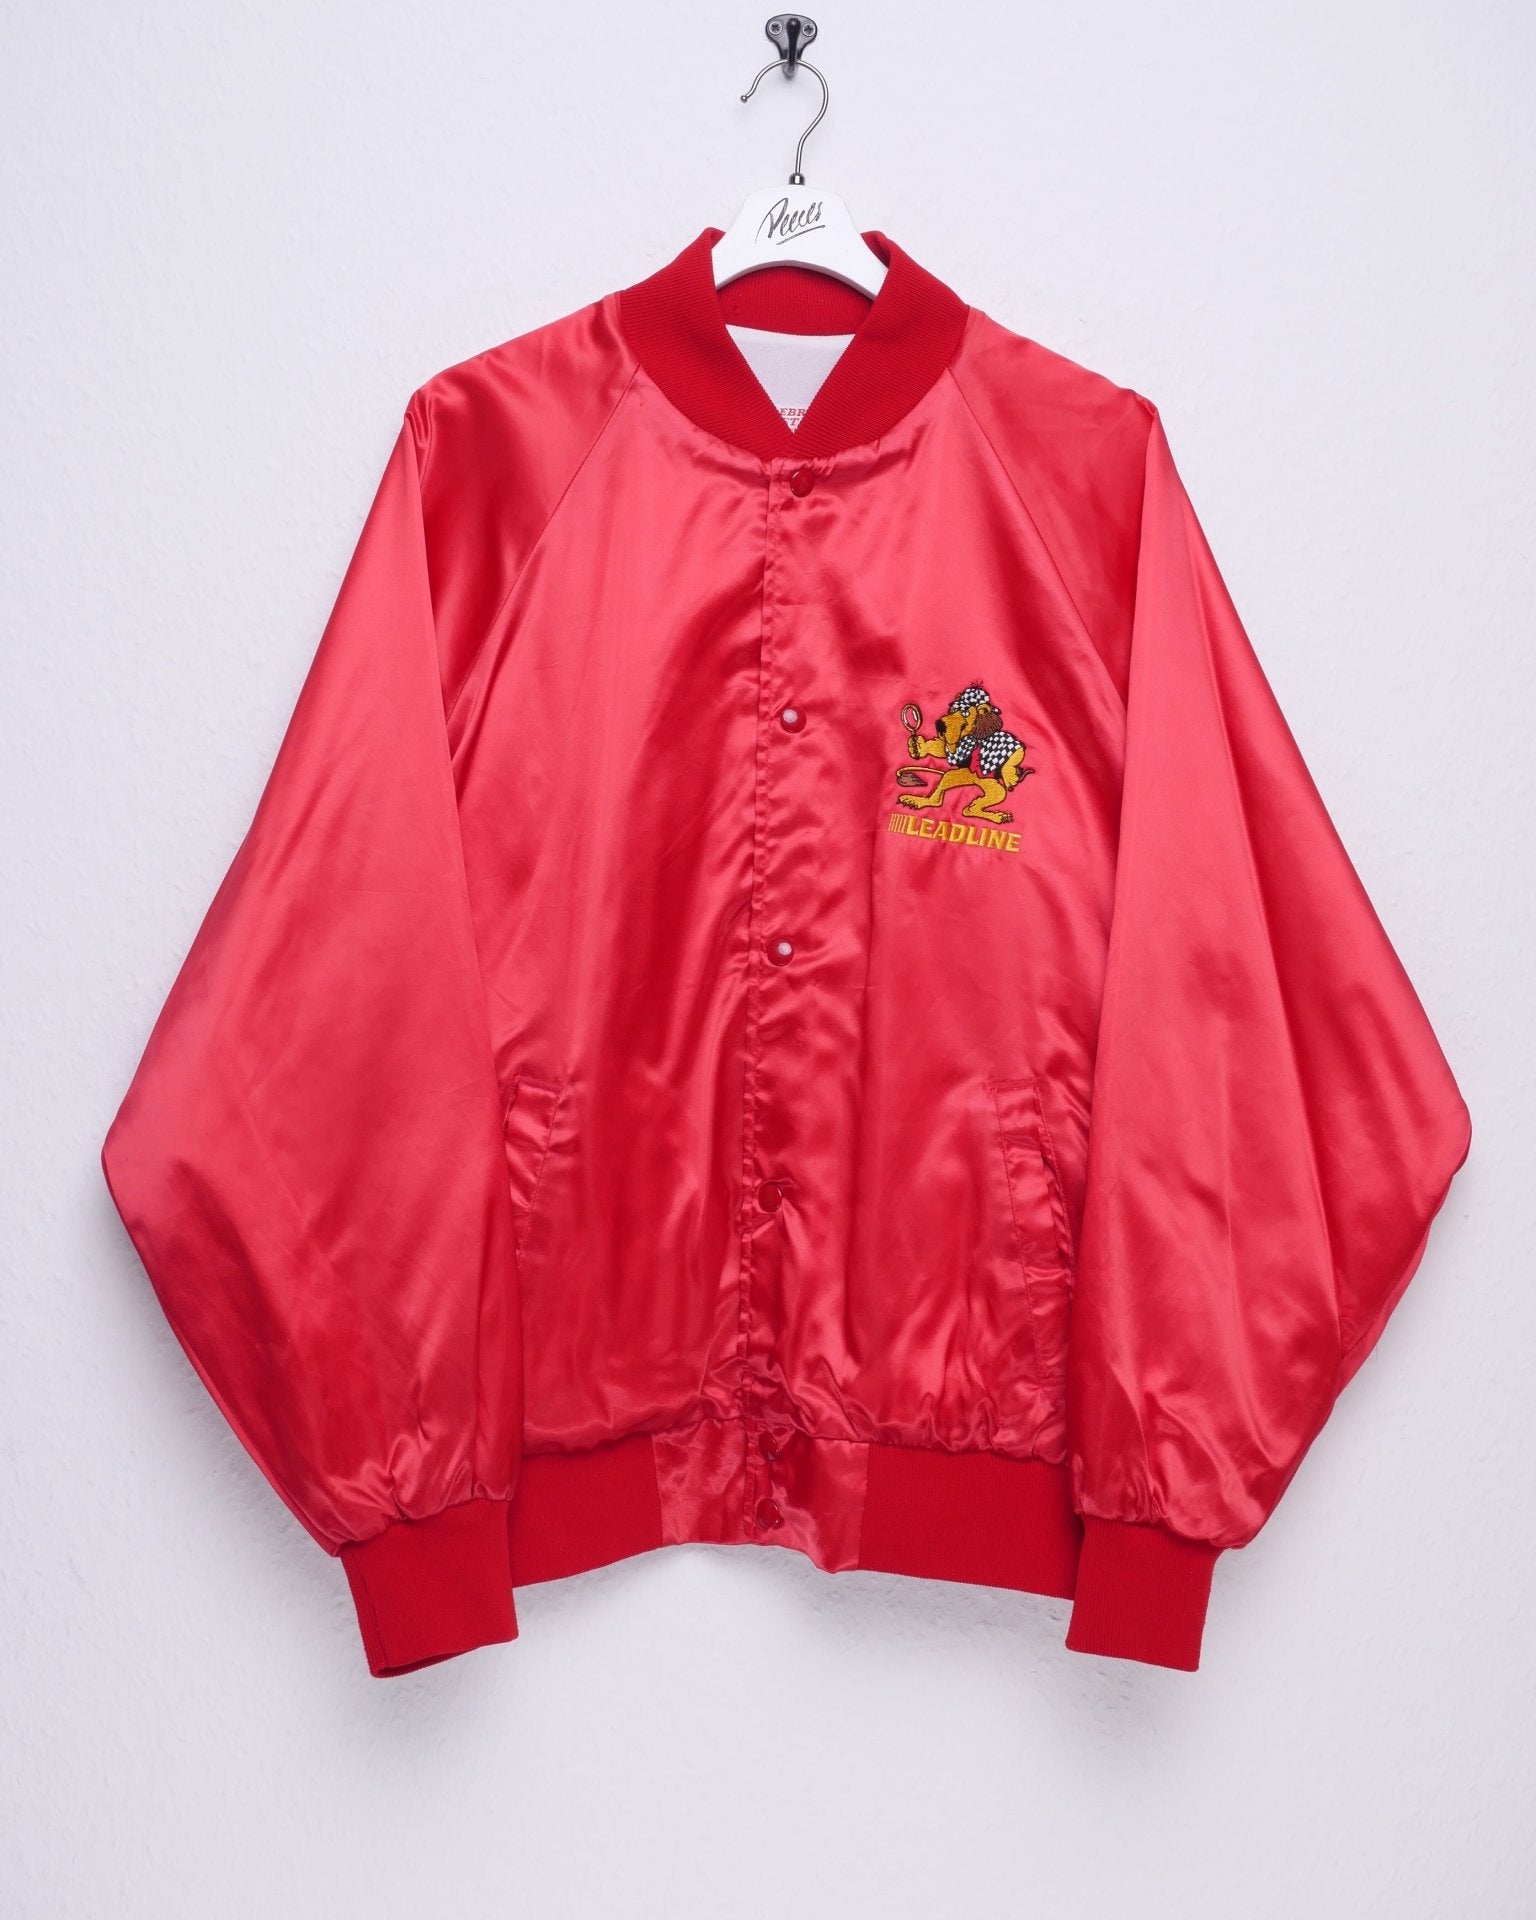 'Leadline' embroidered Graphic red Bomber Jacke - Peeces